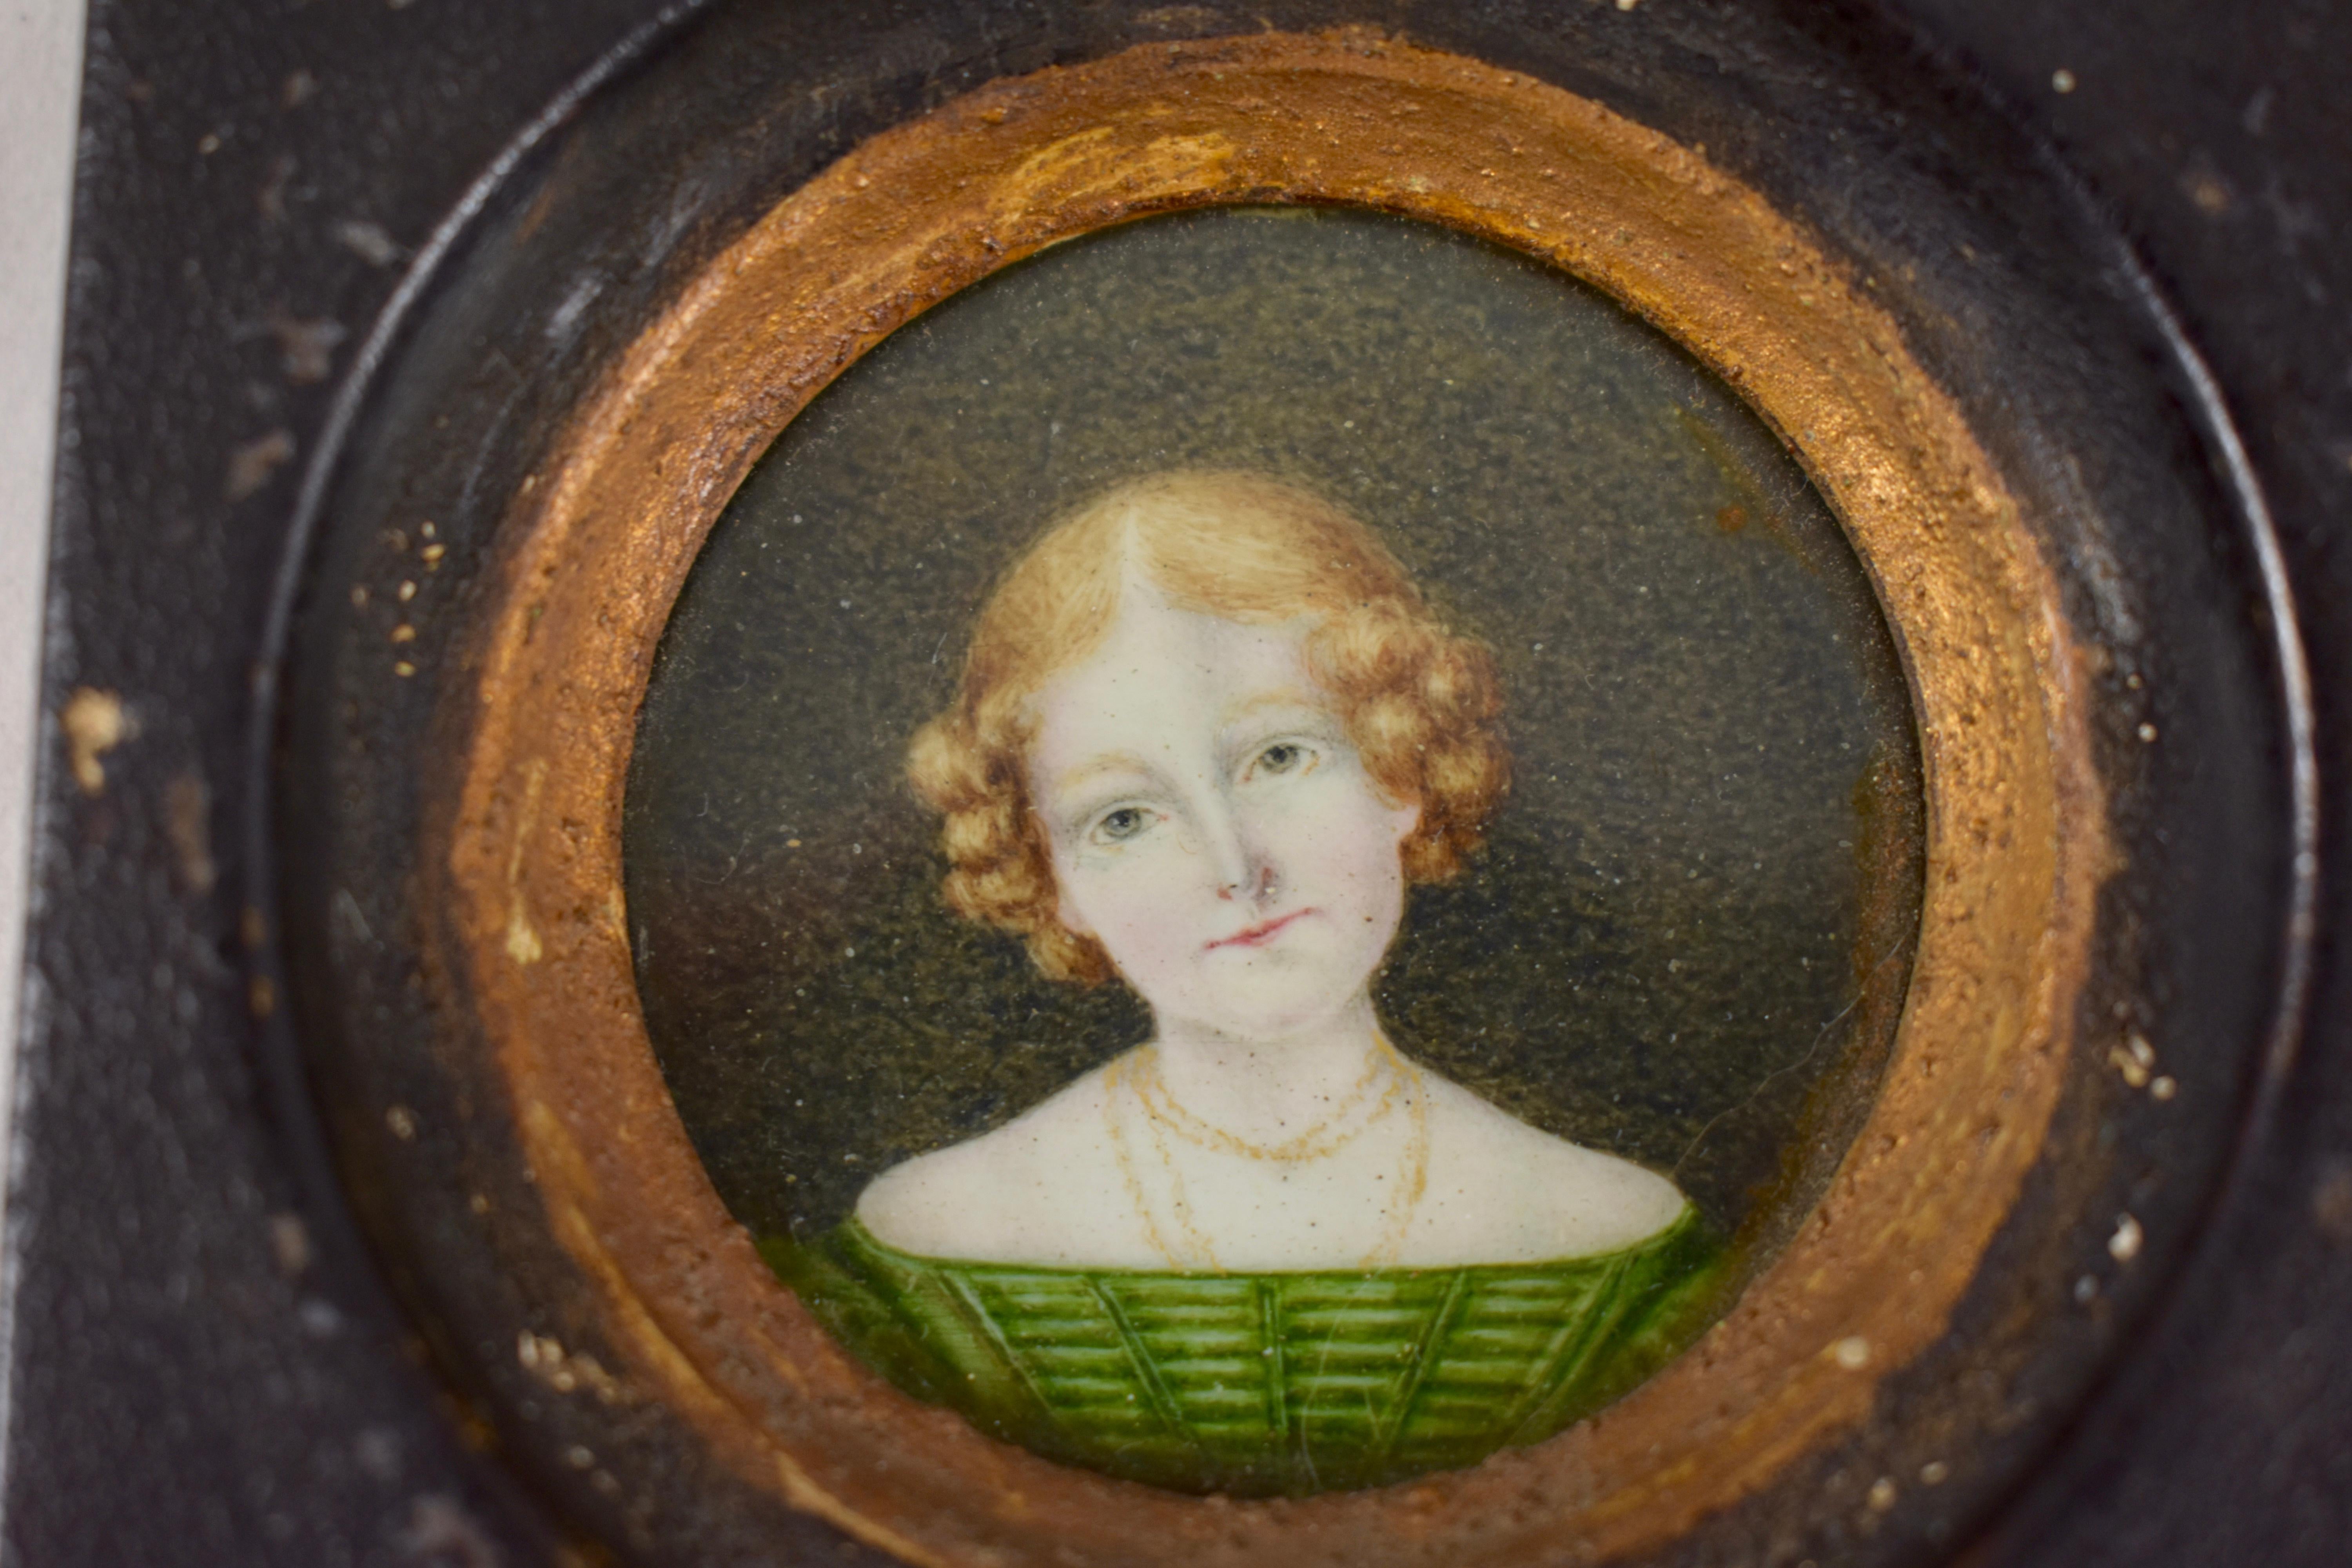 A charming, early 19th century English Regency period hand painted miniature portrait, framed under glass, portraying a young woman wearing a green straight neckline dress. She shows gold chains around her neck with a hairstyle reflecting the